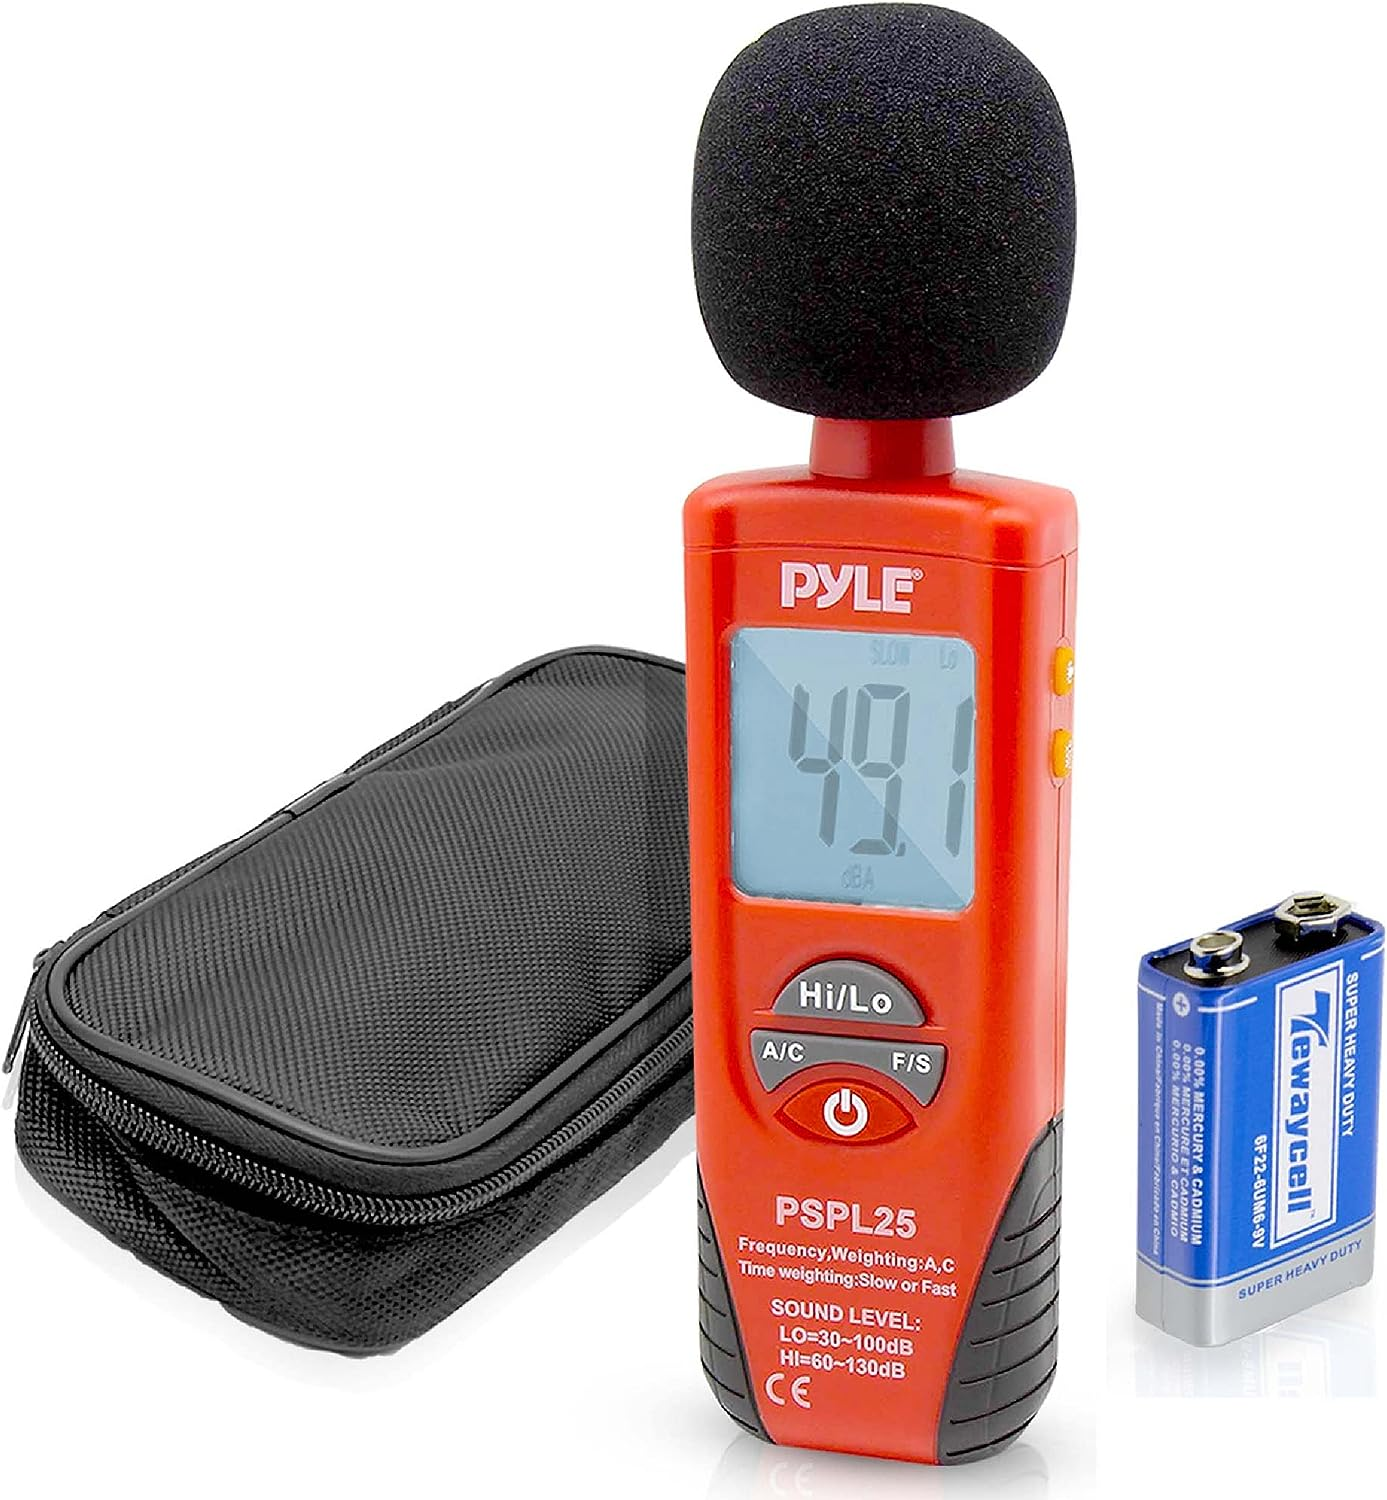 Pyle Digital Handheld Sound Level Meter - Meter Automatic with A and C Frequency Weighting for Musicians and Sound Audio Professionals, 9V Battery Type - Pyle SPL25, Red/Black (PSPL25)